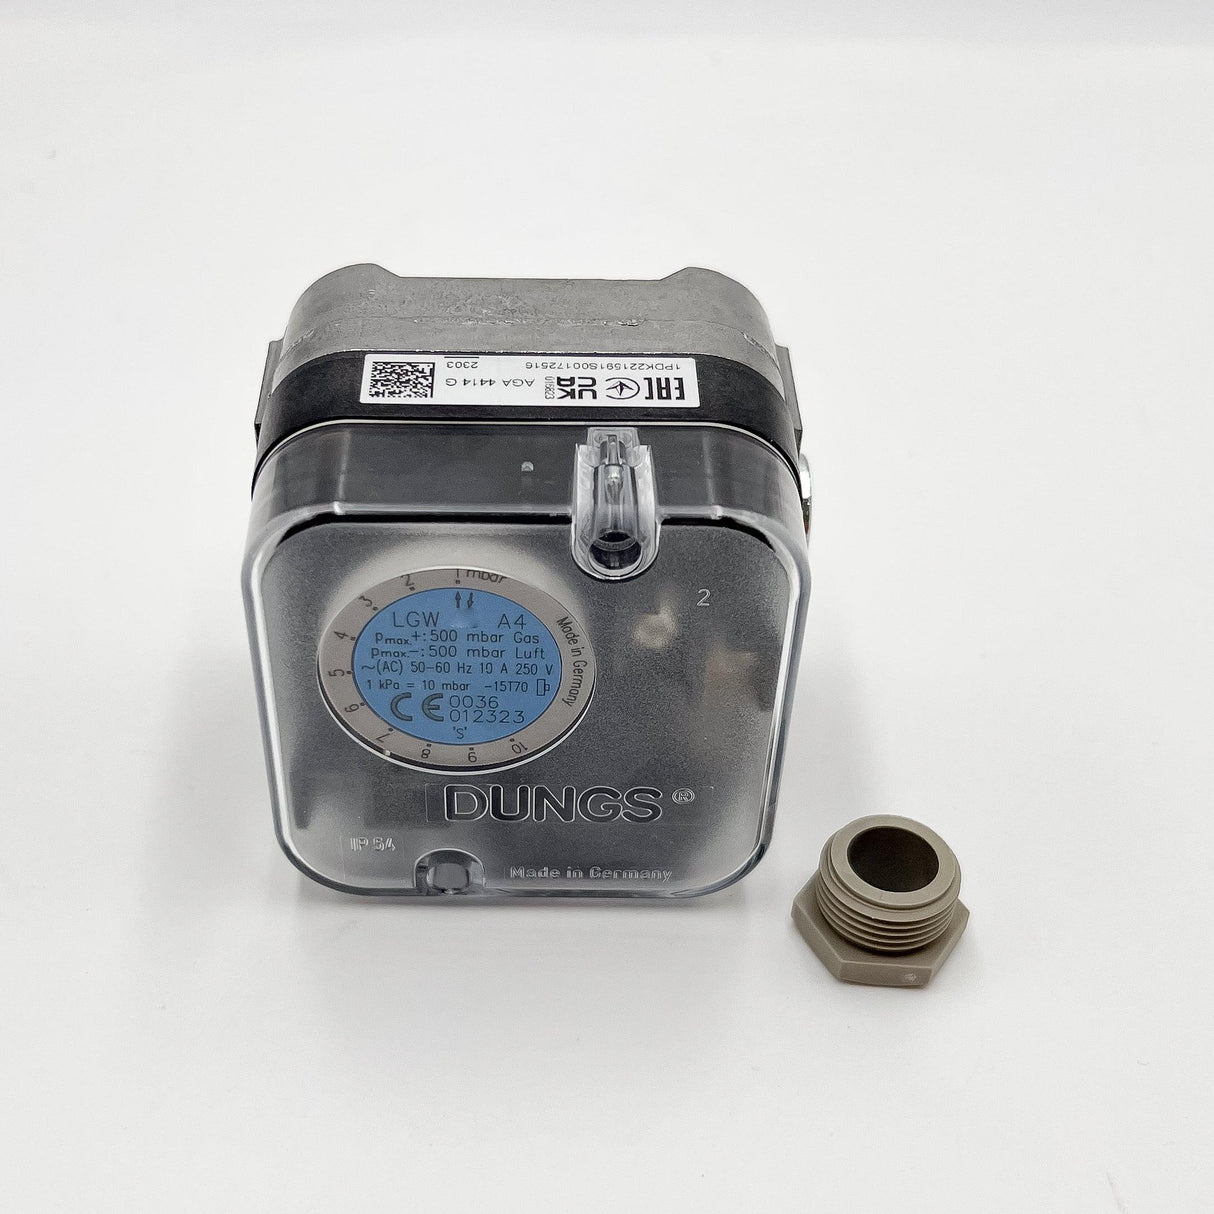 Dungs LGW3 A4 0.4-3 mbar Differential Air Pressure Switch